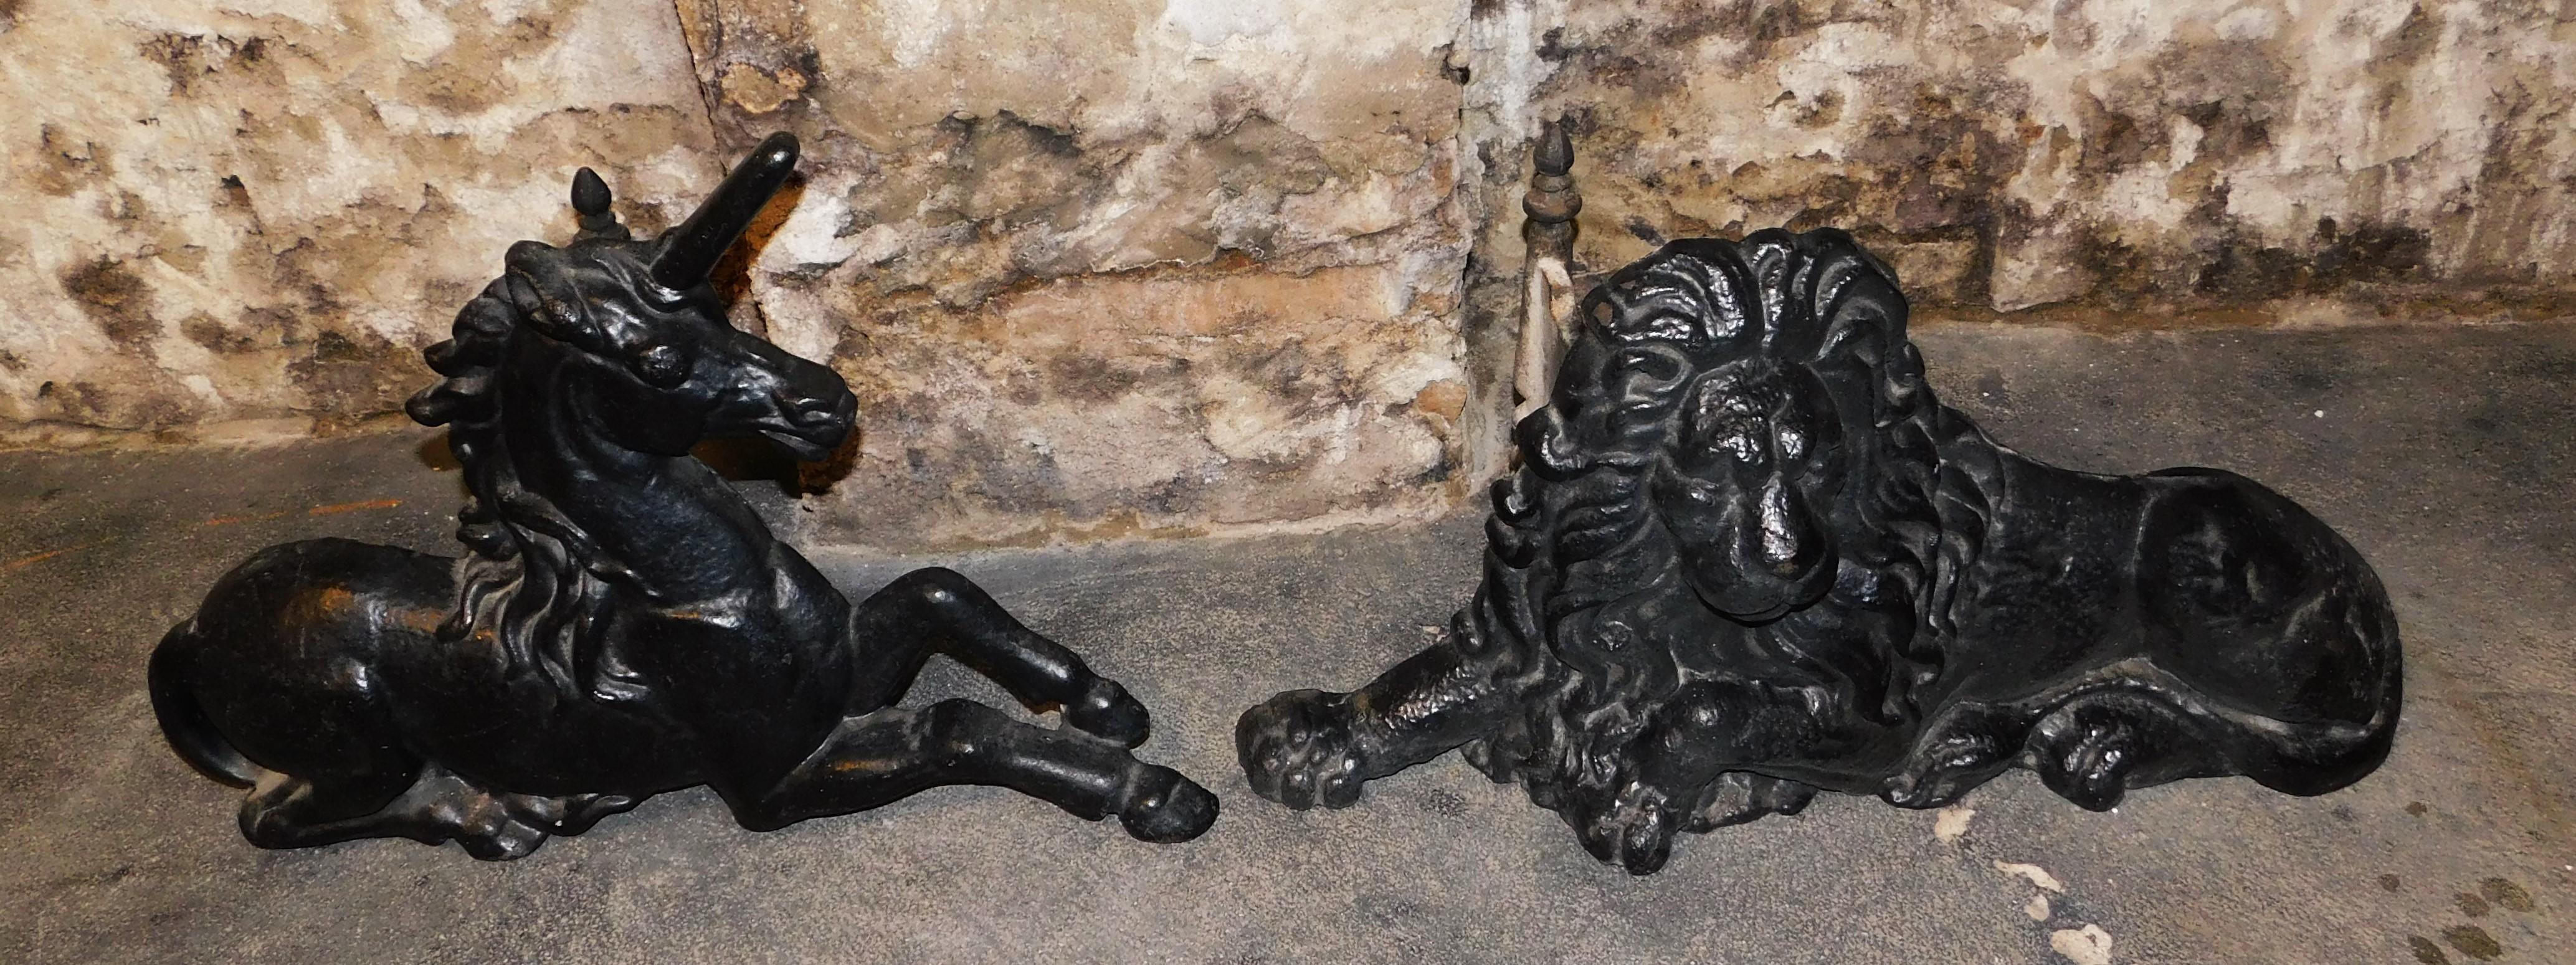 Victorian cast iron lion and unicorn painted black fireplace ornaments. They are symbols of the United Kingdom, the lion stands for England and the unicorn for Scotland. The combination dates back to the 1603 accession of James I of England who was